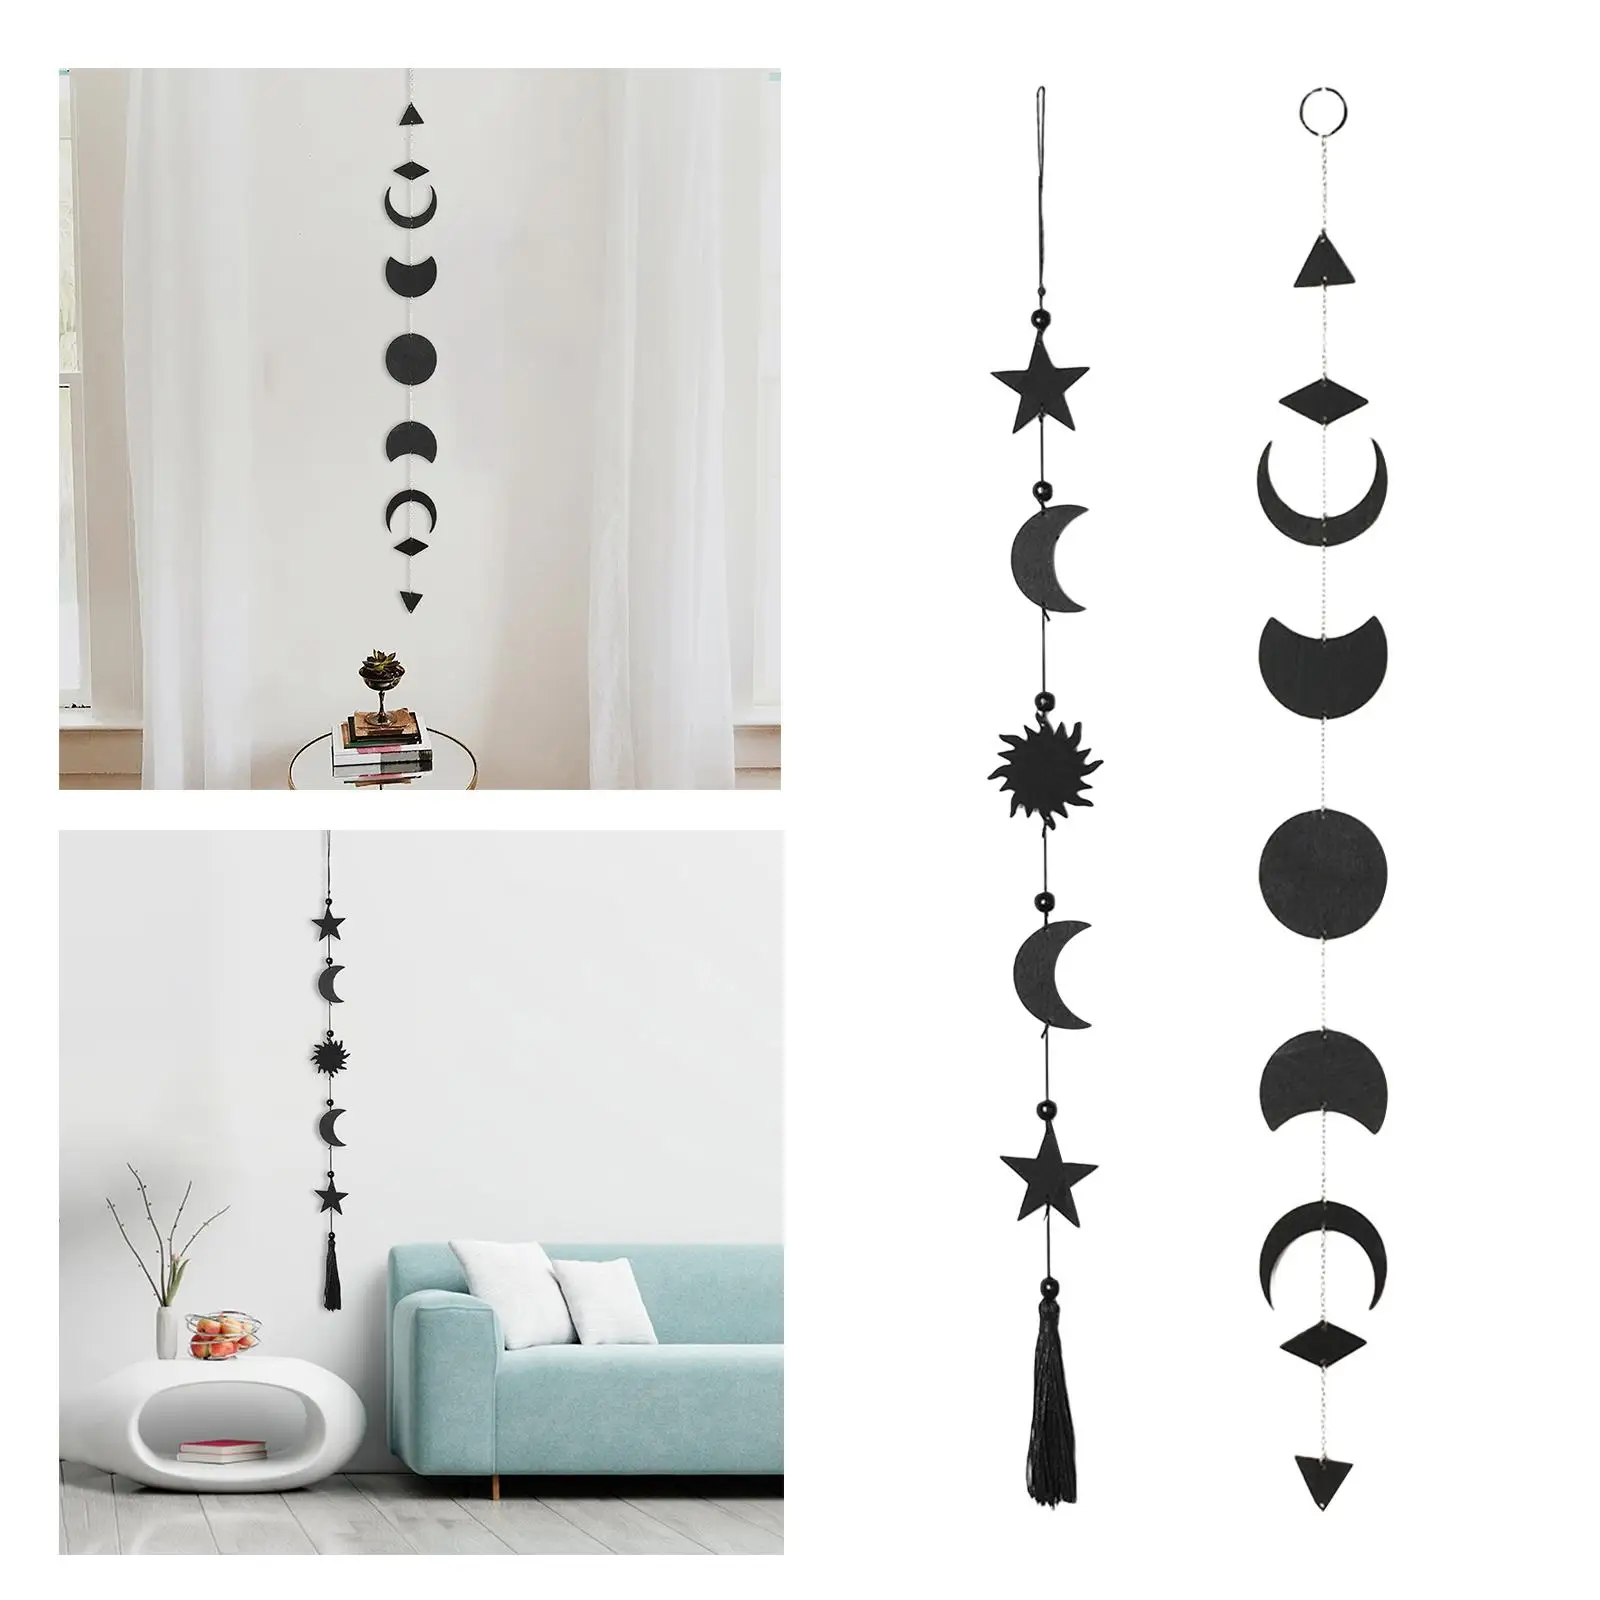 Acrylic Moon Decor Boho Wall Hanging Ornament Moon Phase Mirror for Living Room Apartment Nursery Office Decorations